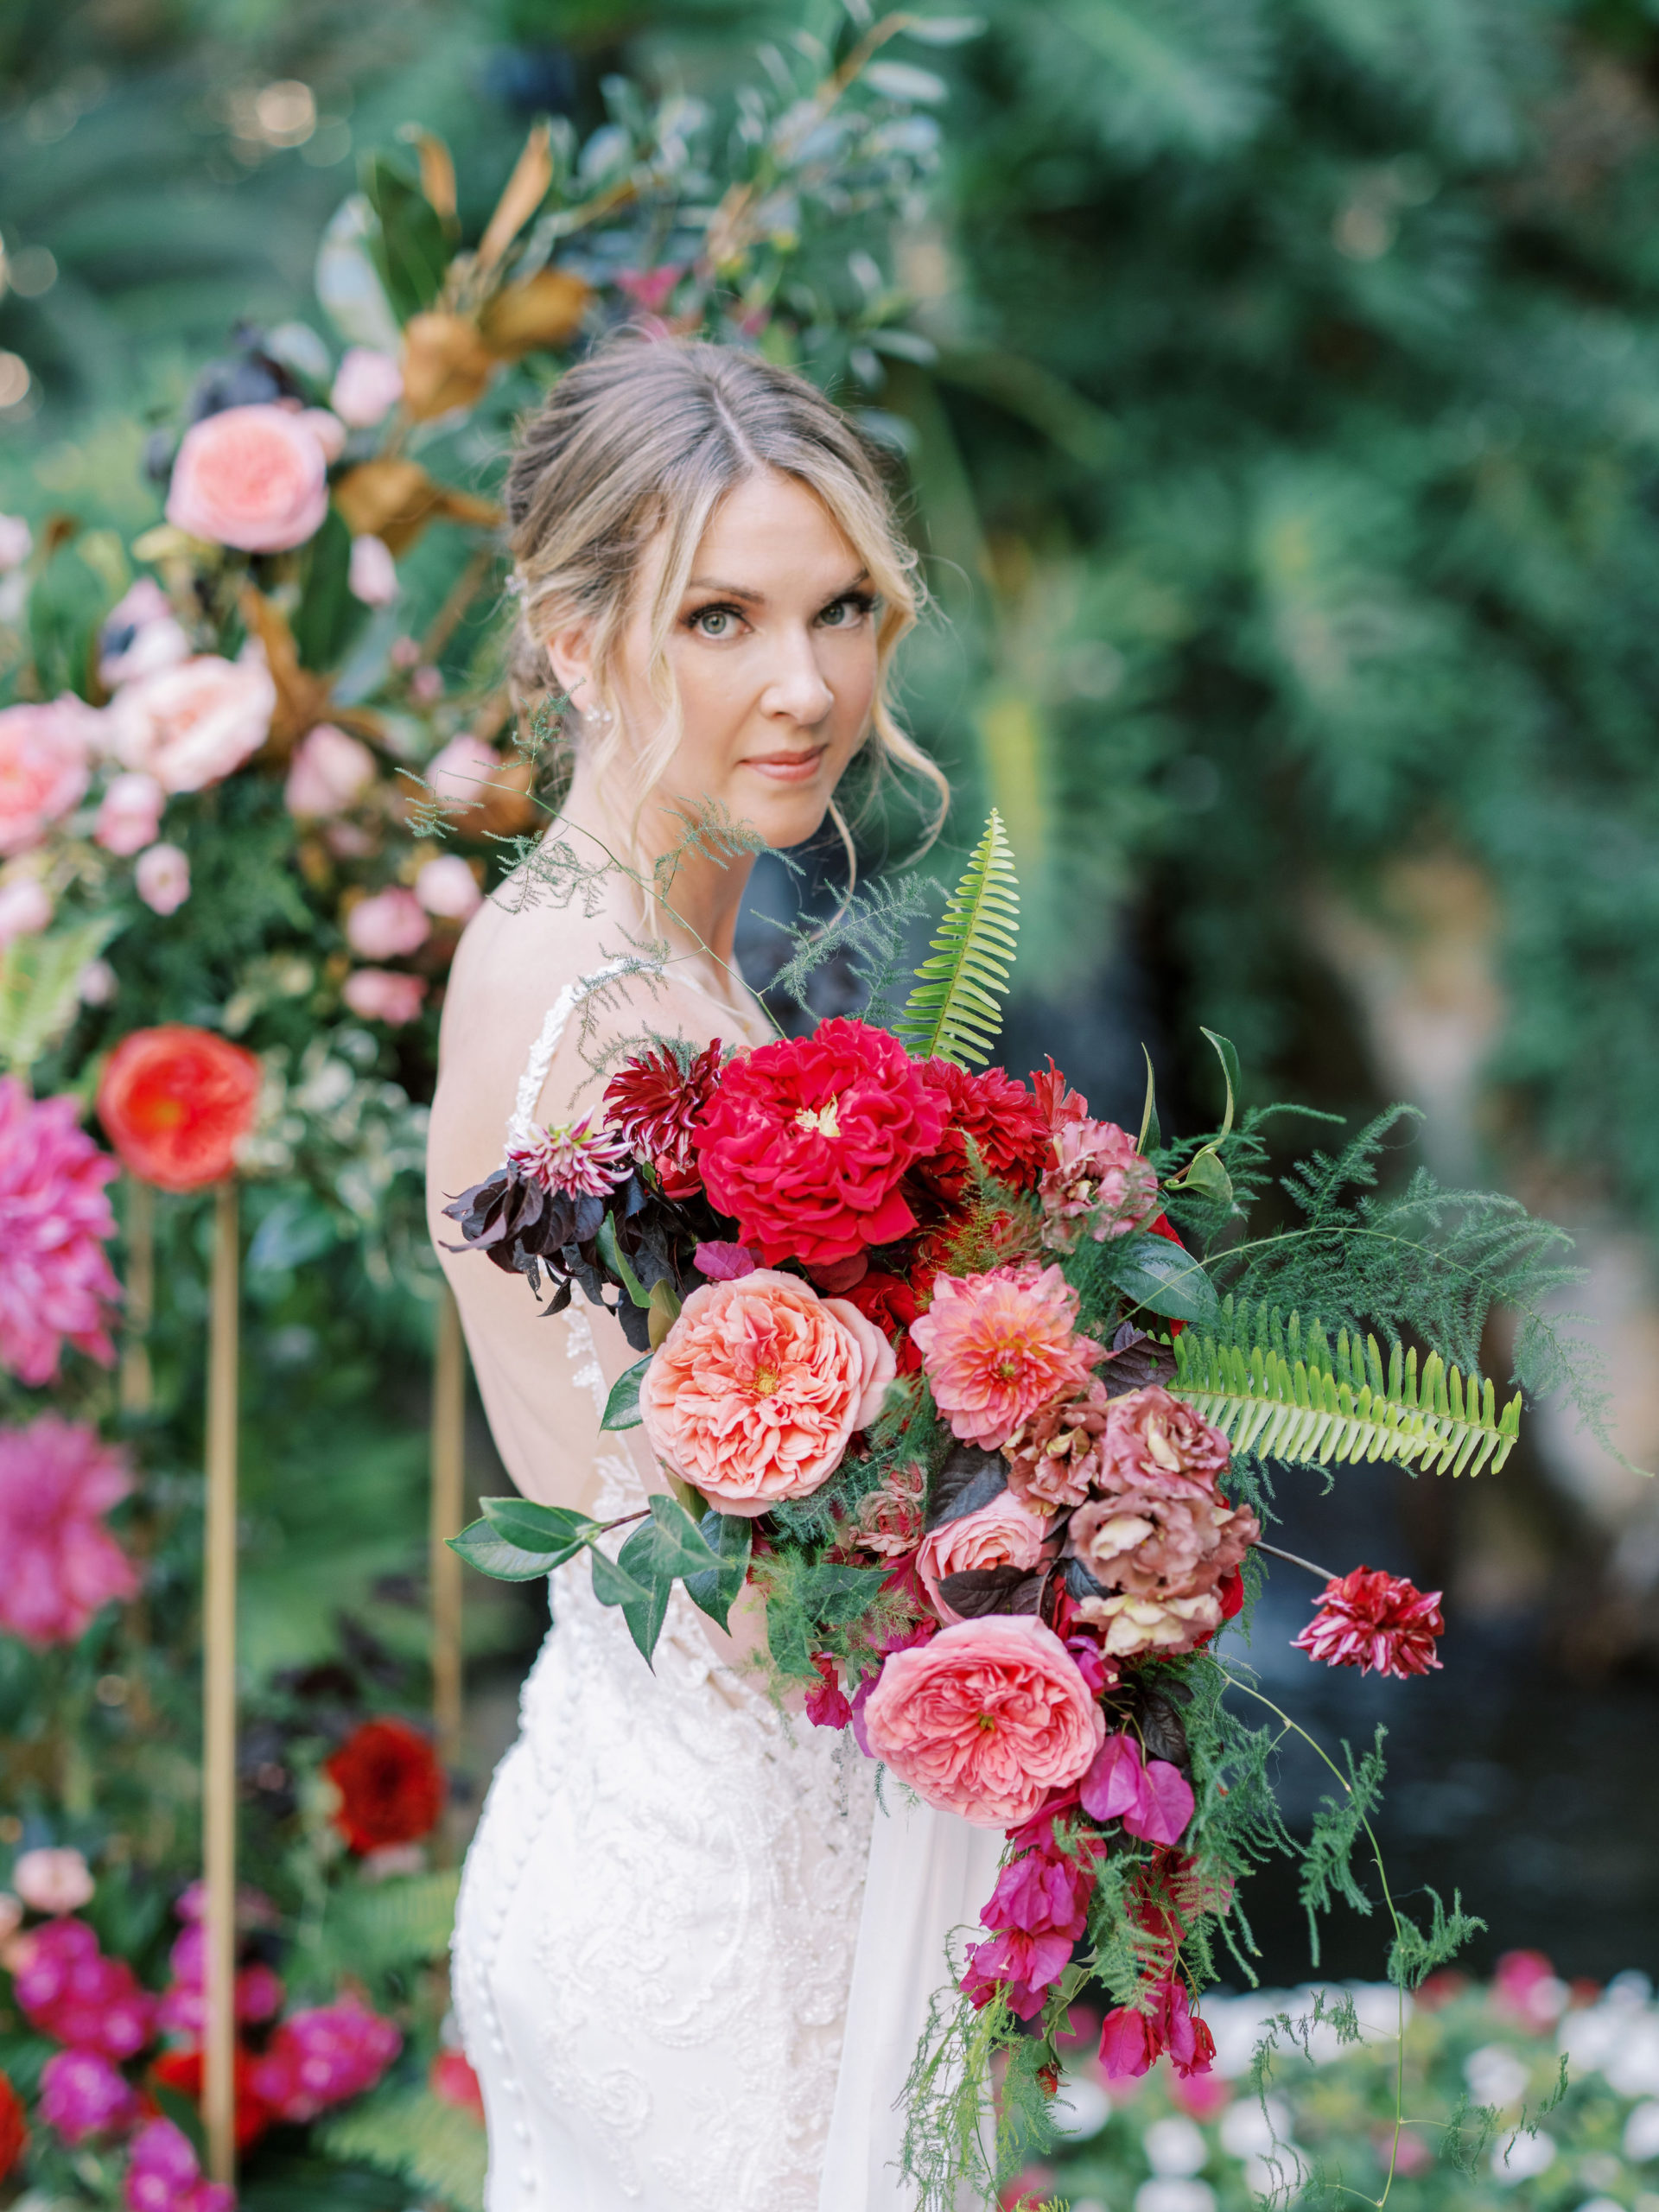 Grand Tradition Wedding 2021 - best wedding photographer San Diego - bride with bouquet by Tularosa Flowers